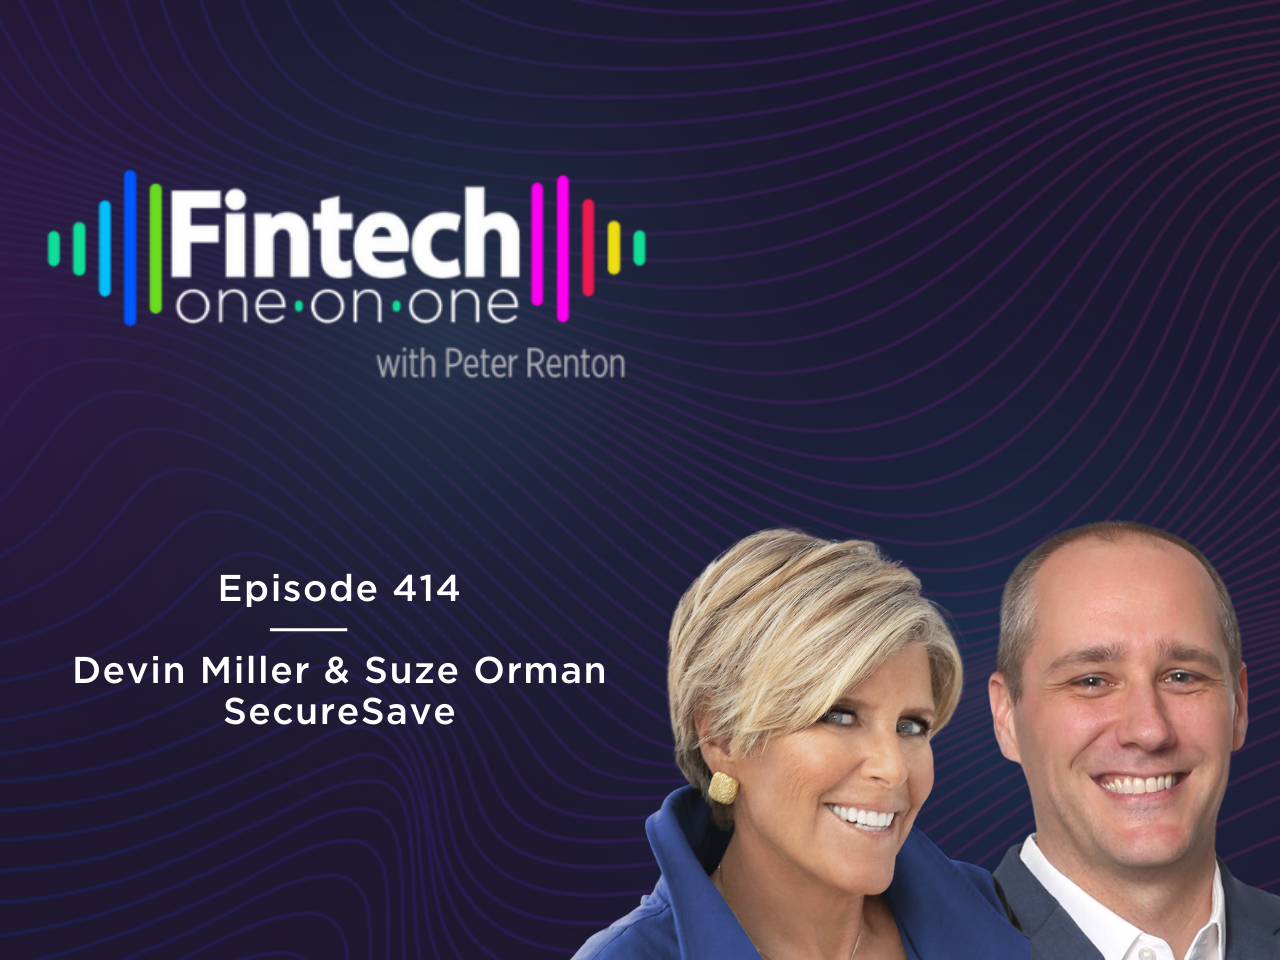 Devin Miller, Co-Founder & CEO, and Suze Orman, Co-Founder of SecureSave